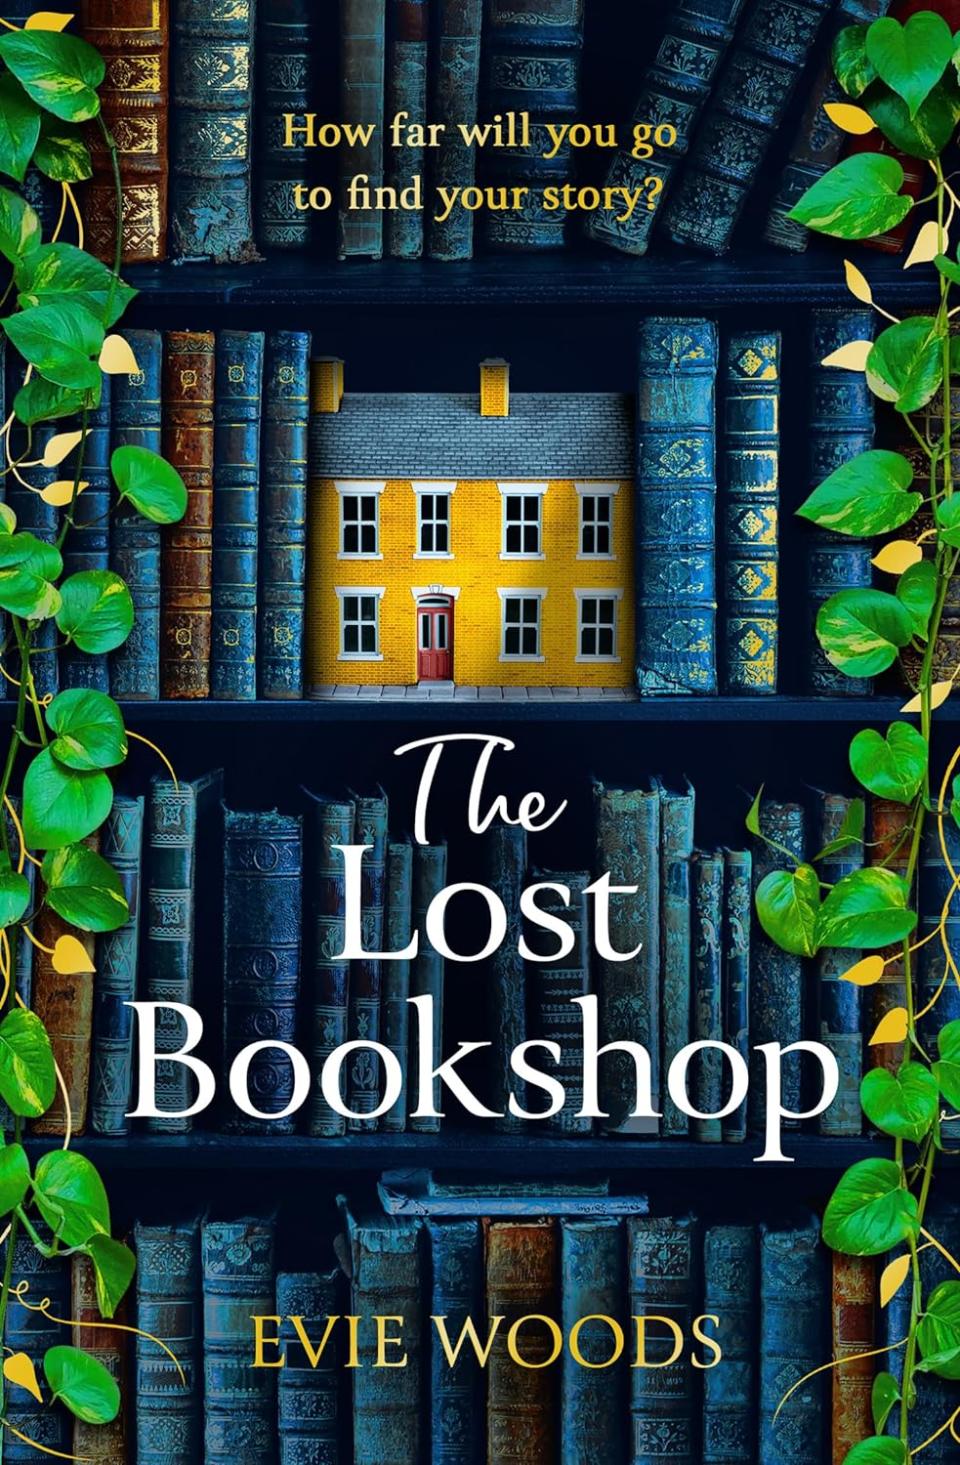 Cozy Fall Reads: The Lost Bookshop by Evie Woods book cover shows a bookshelf with green vines peeking out